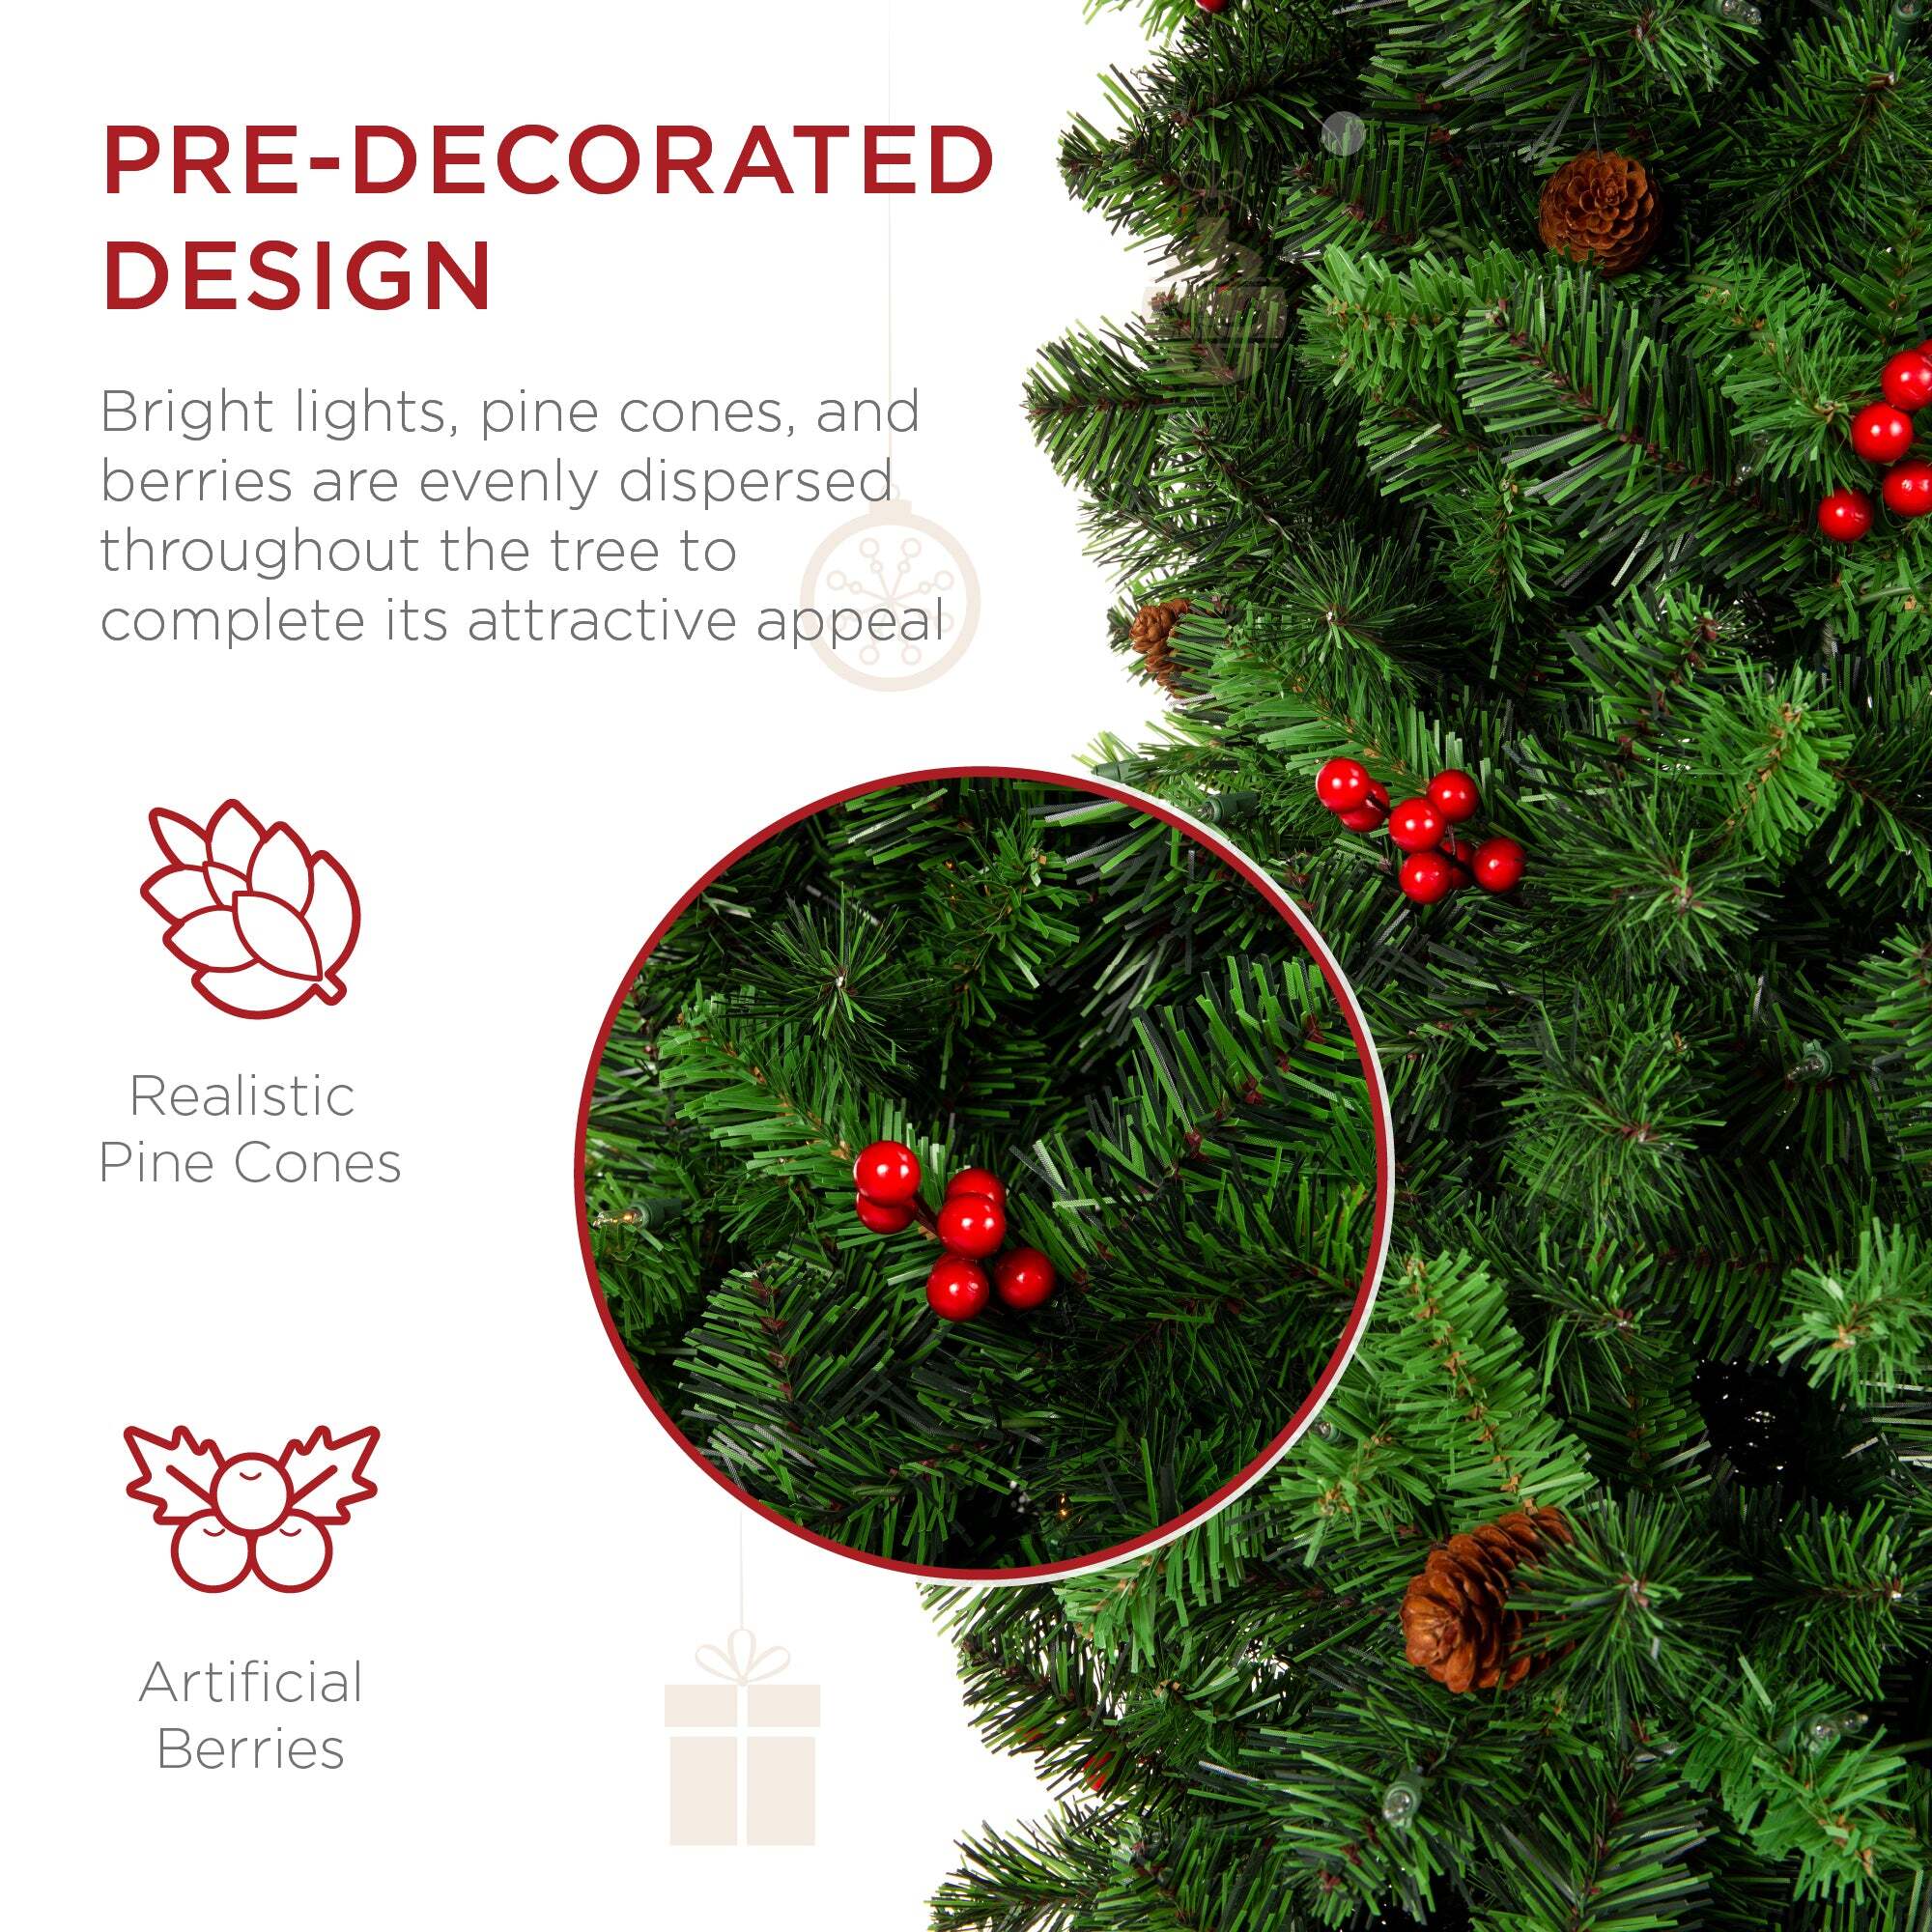 Pre-Decorated Spruce Pencil Christmas Tree w/ Berries, Pine Cones